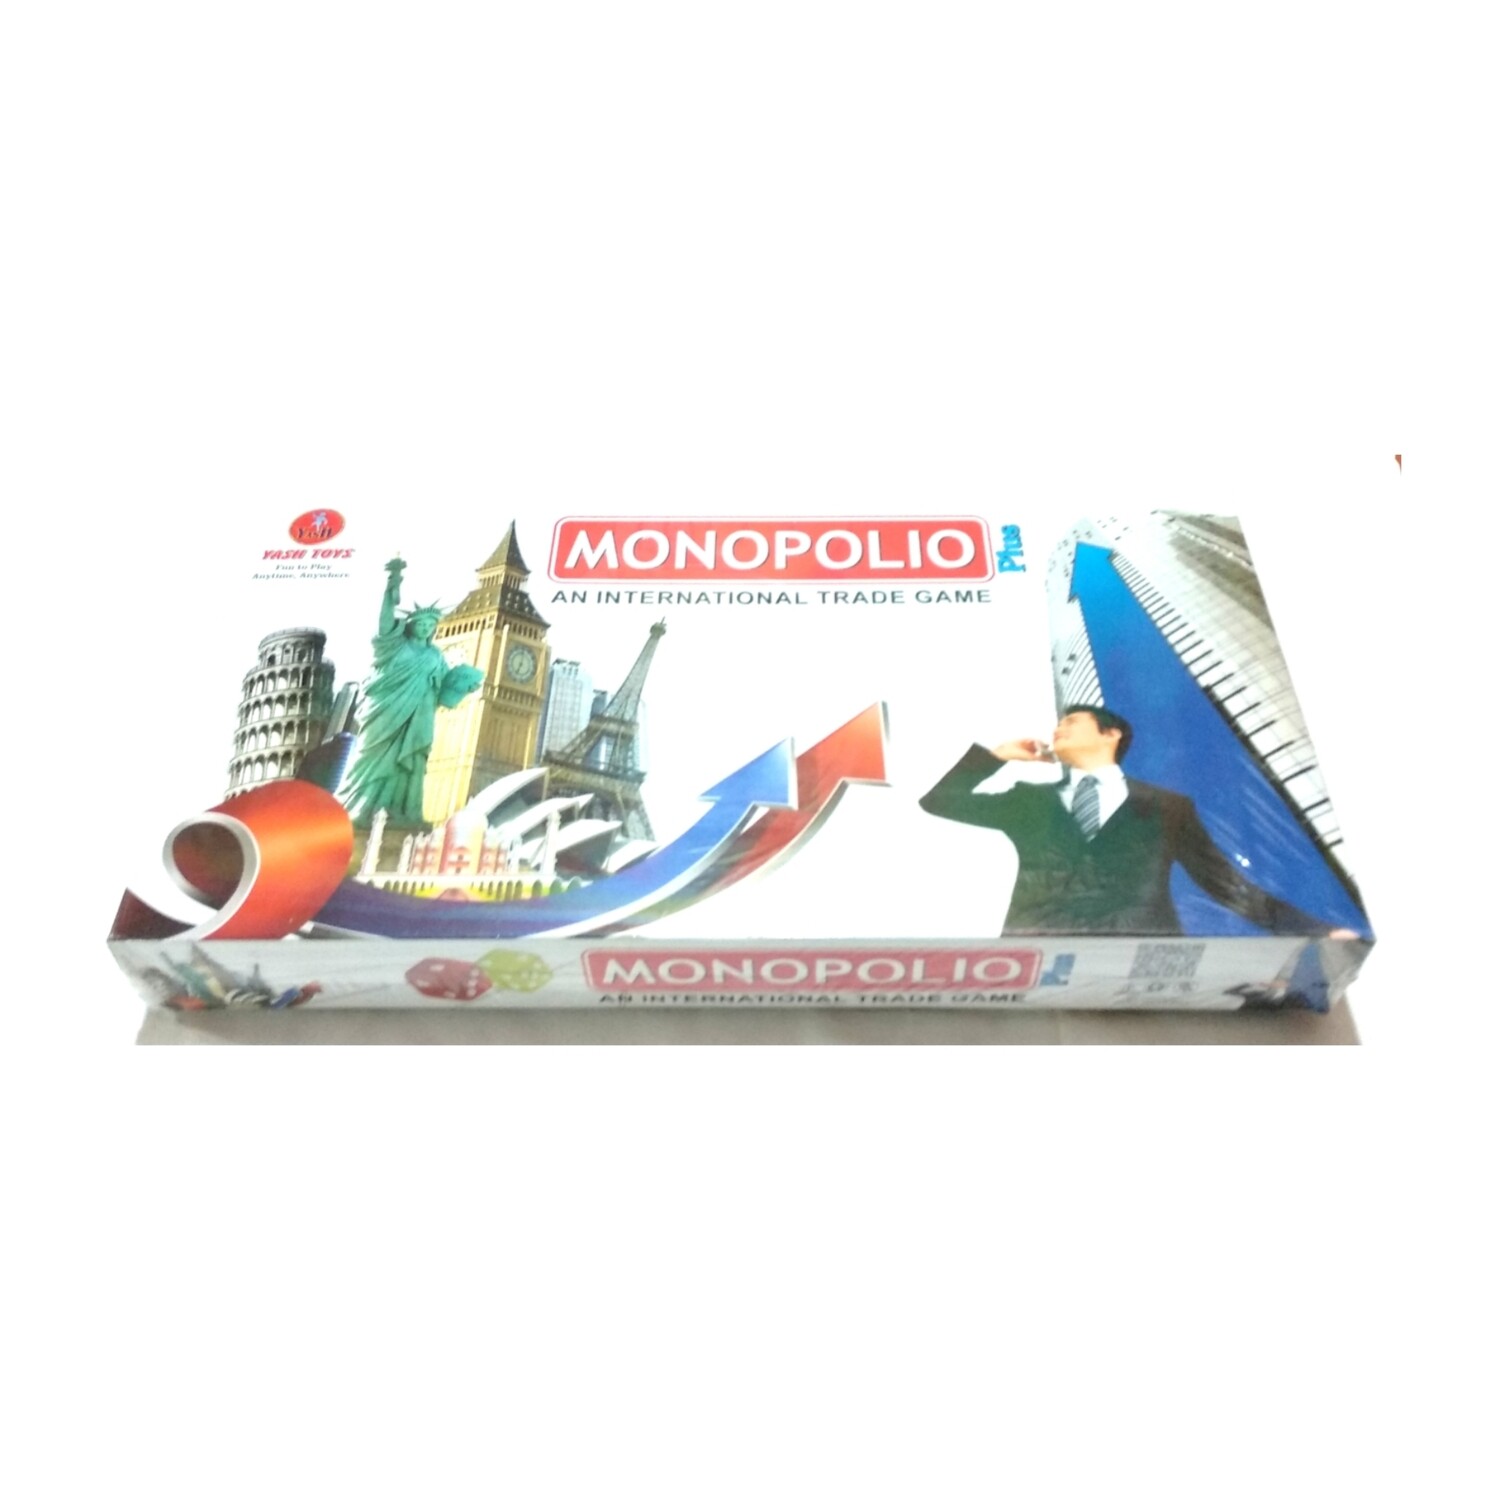 Yash Toys Monopolio Plus An International Trade Game (World series with adventure) For 5+ Years Kids